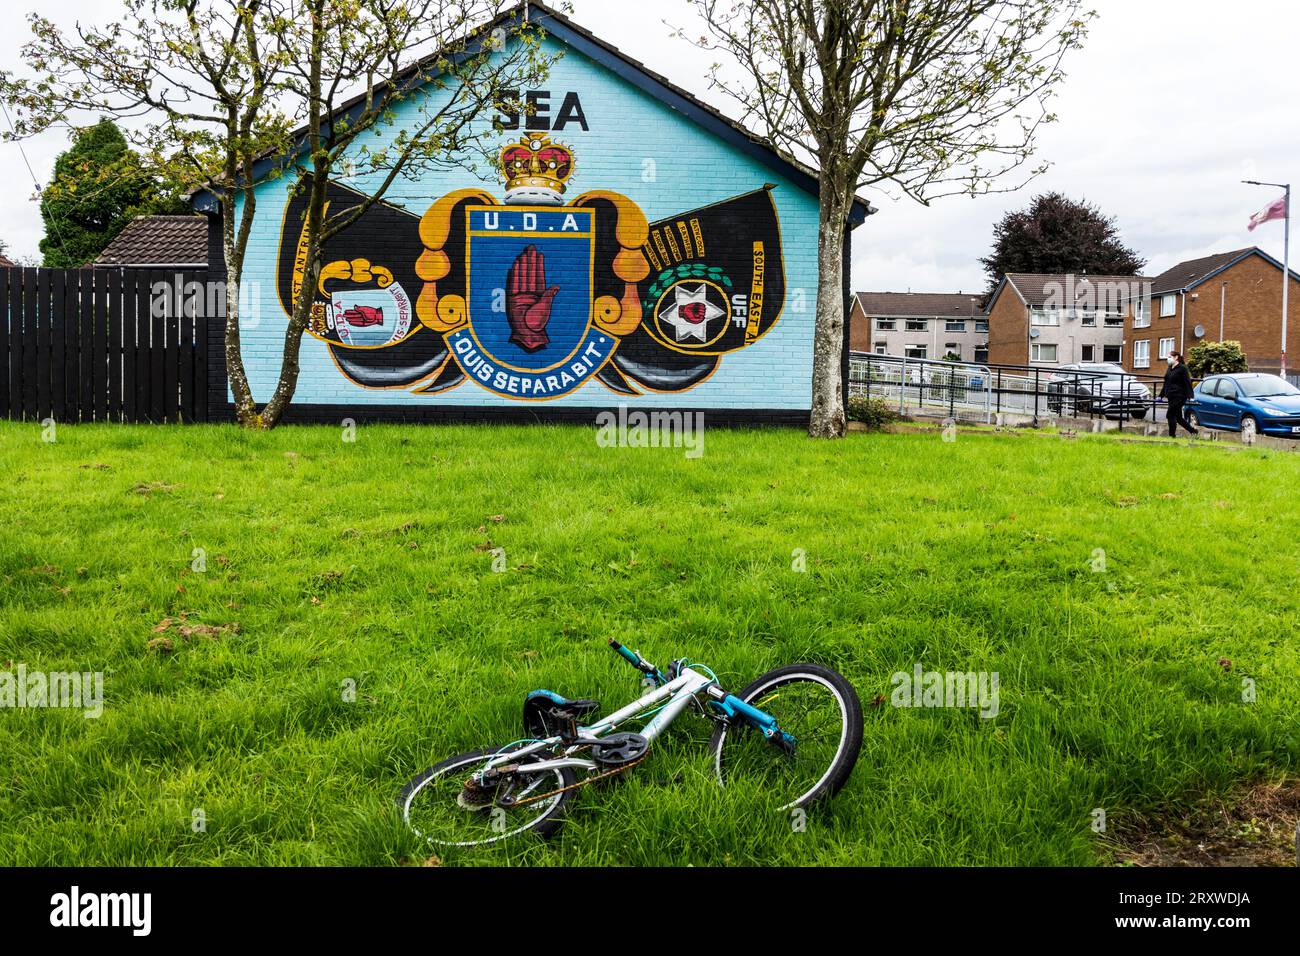 Loyalist mural for UDA - Ulster Defence Association, Ballyclare, County Antrim, Northern Ireland. Stock Photo